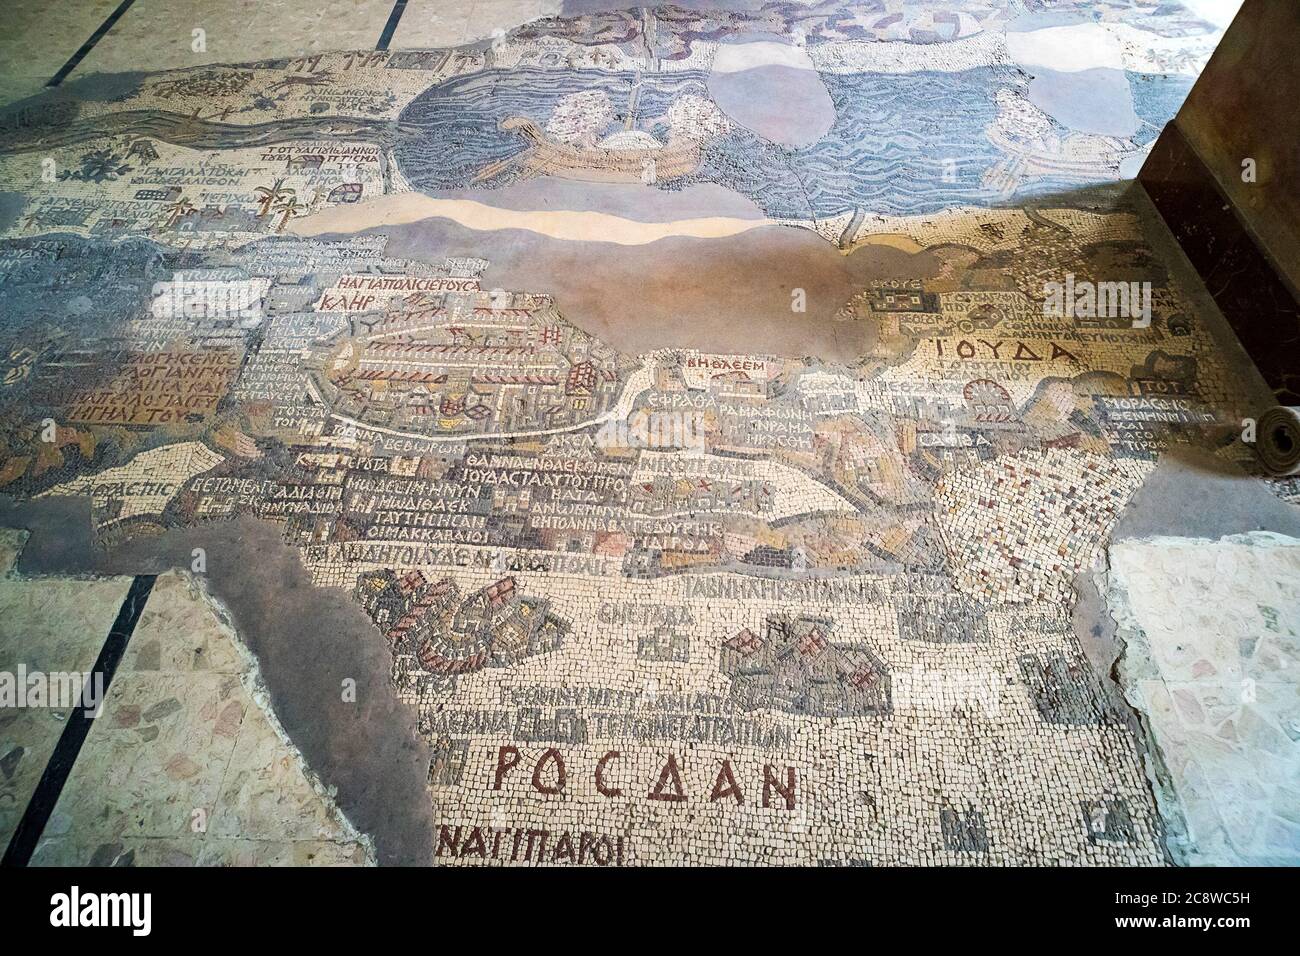 Jordan. Madaba, biblical Medeba - St. George's Church. Fragment of the oldest floor mosaic map of the Holy Land - the Jordan River and the Dead Sea Stock Photo